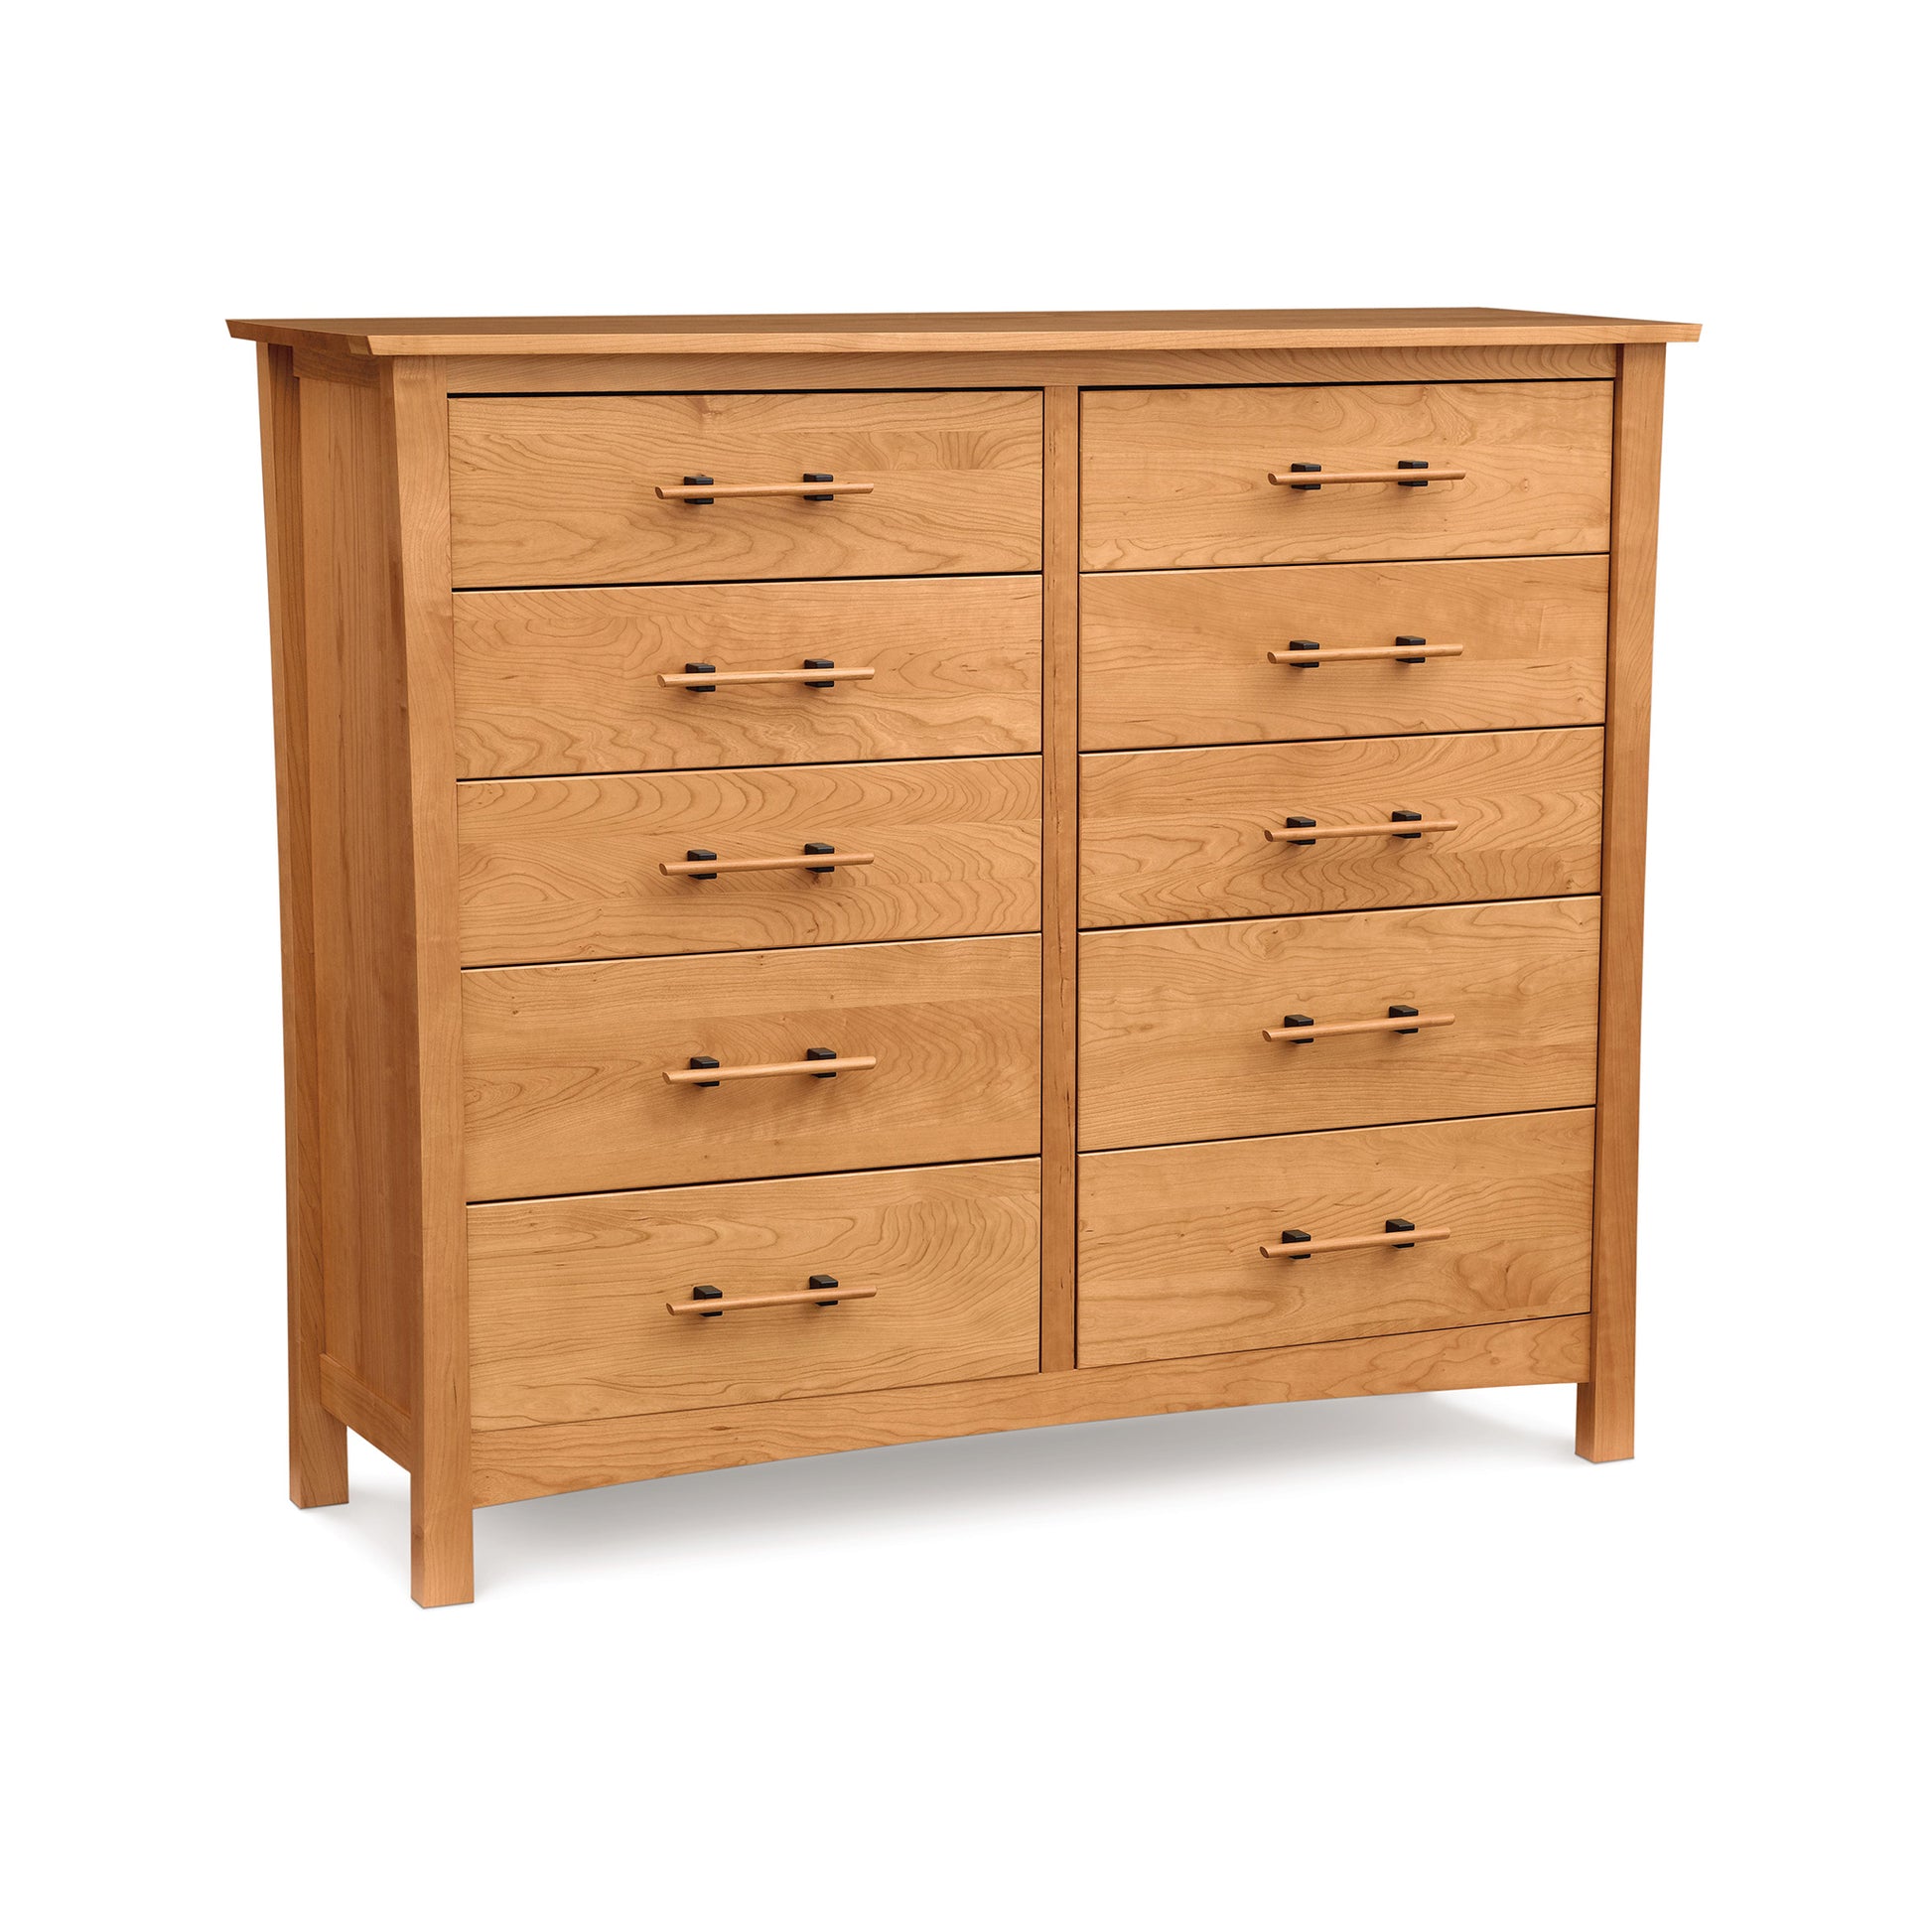 A Copeland Furniture Monterey 10-Drawer Dresser made of eco-friendly cherry wood with metal handles isolated on a white background.